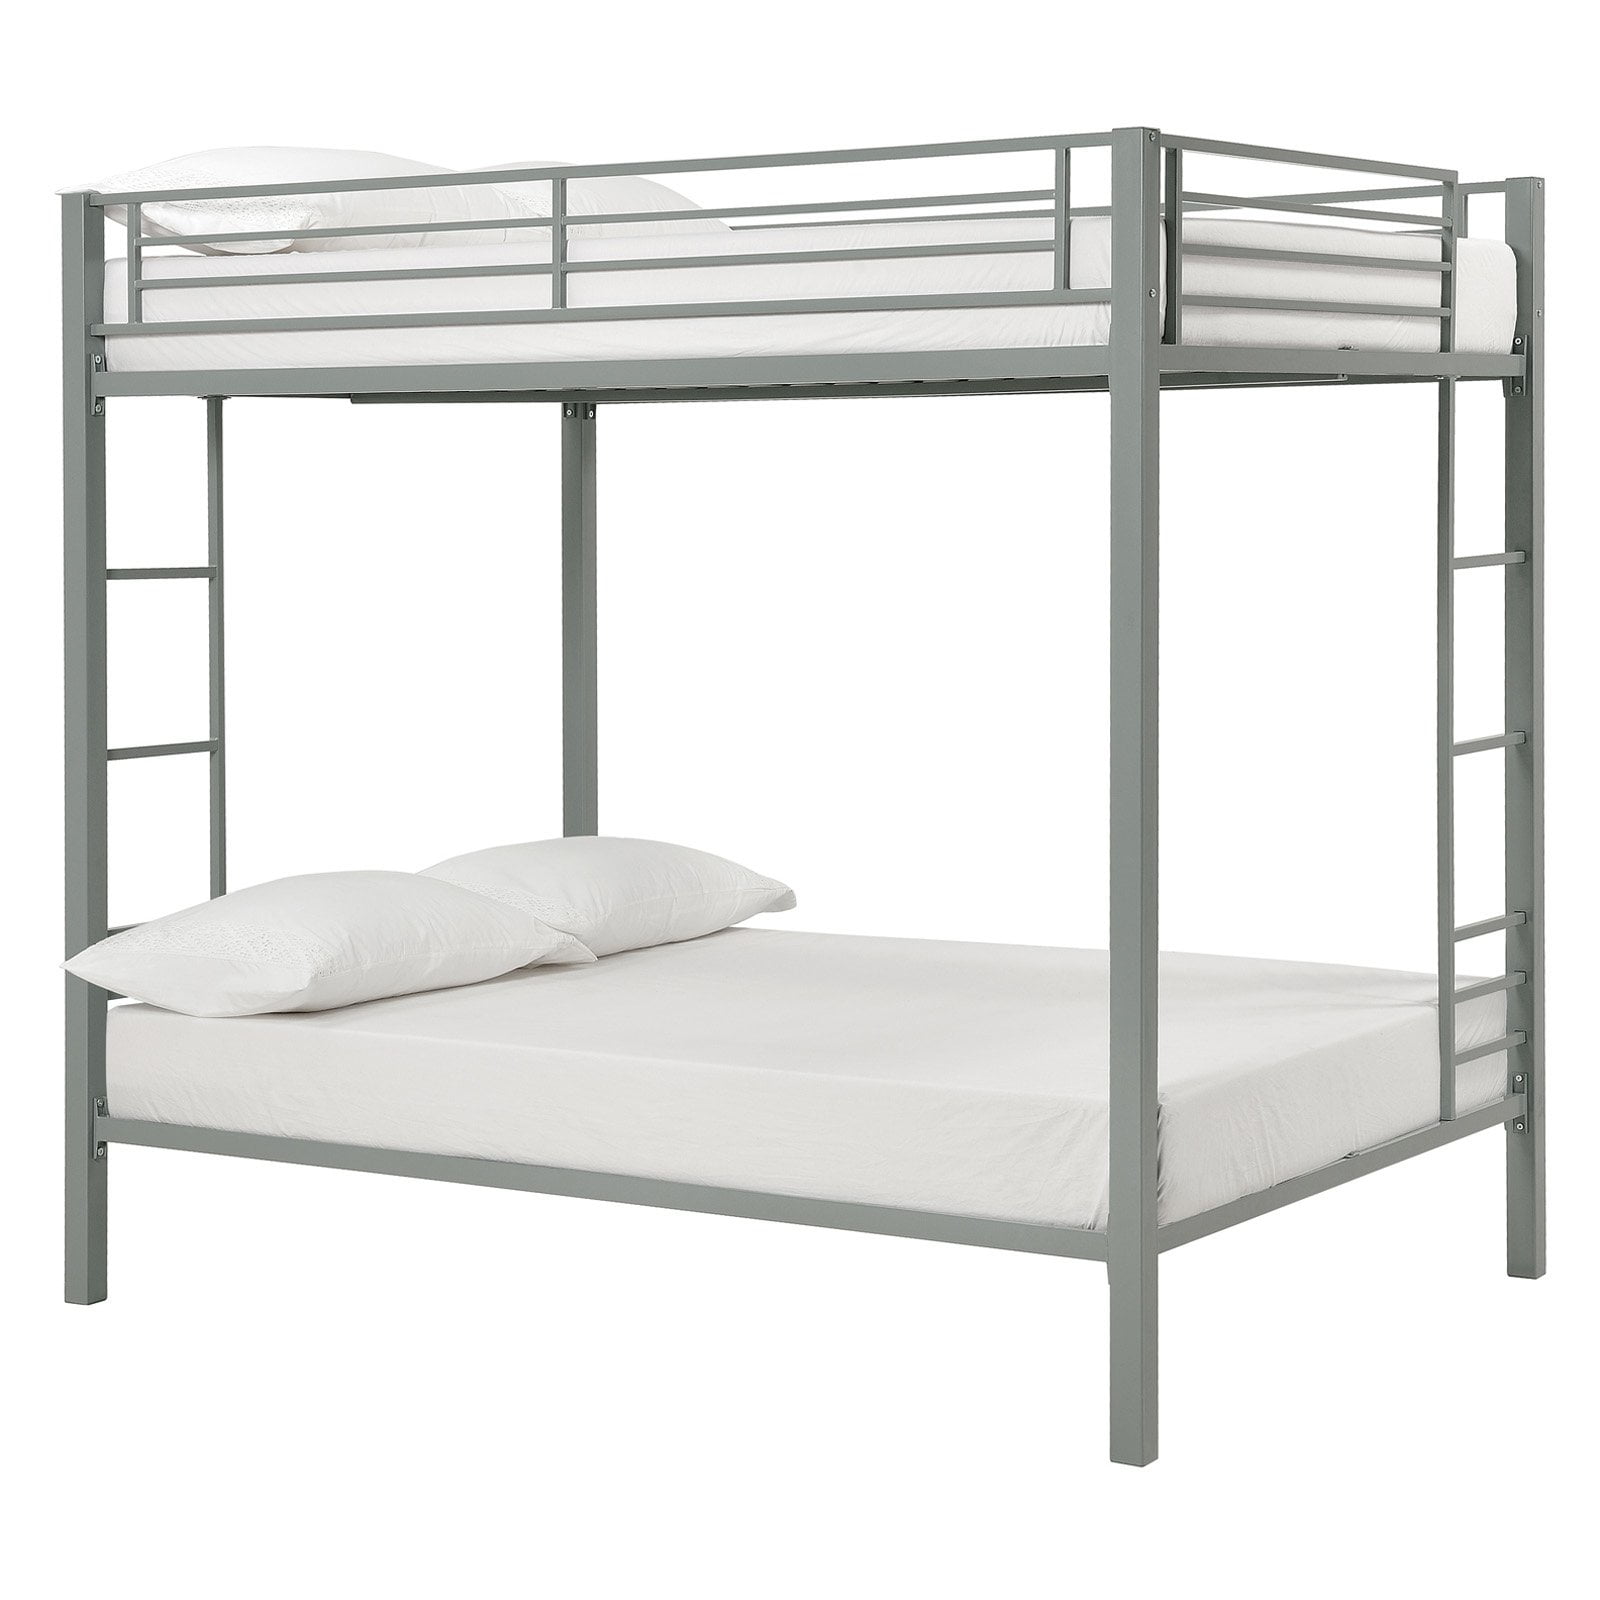 Dhp Full Over Bunk Bed For Kids, Dhp Bunk Bed Instructions